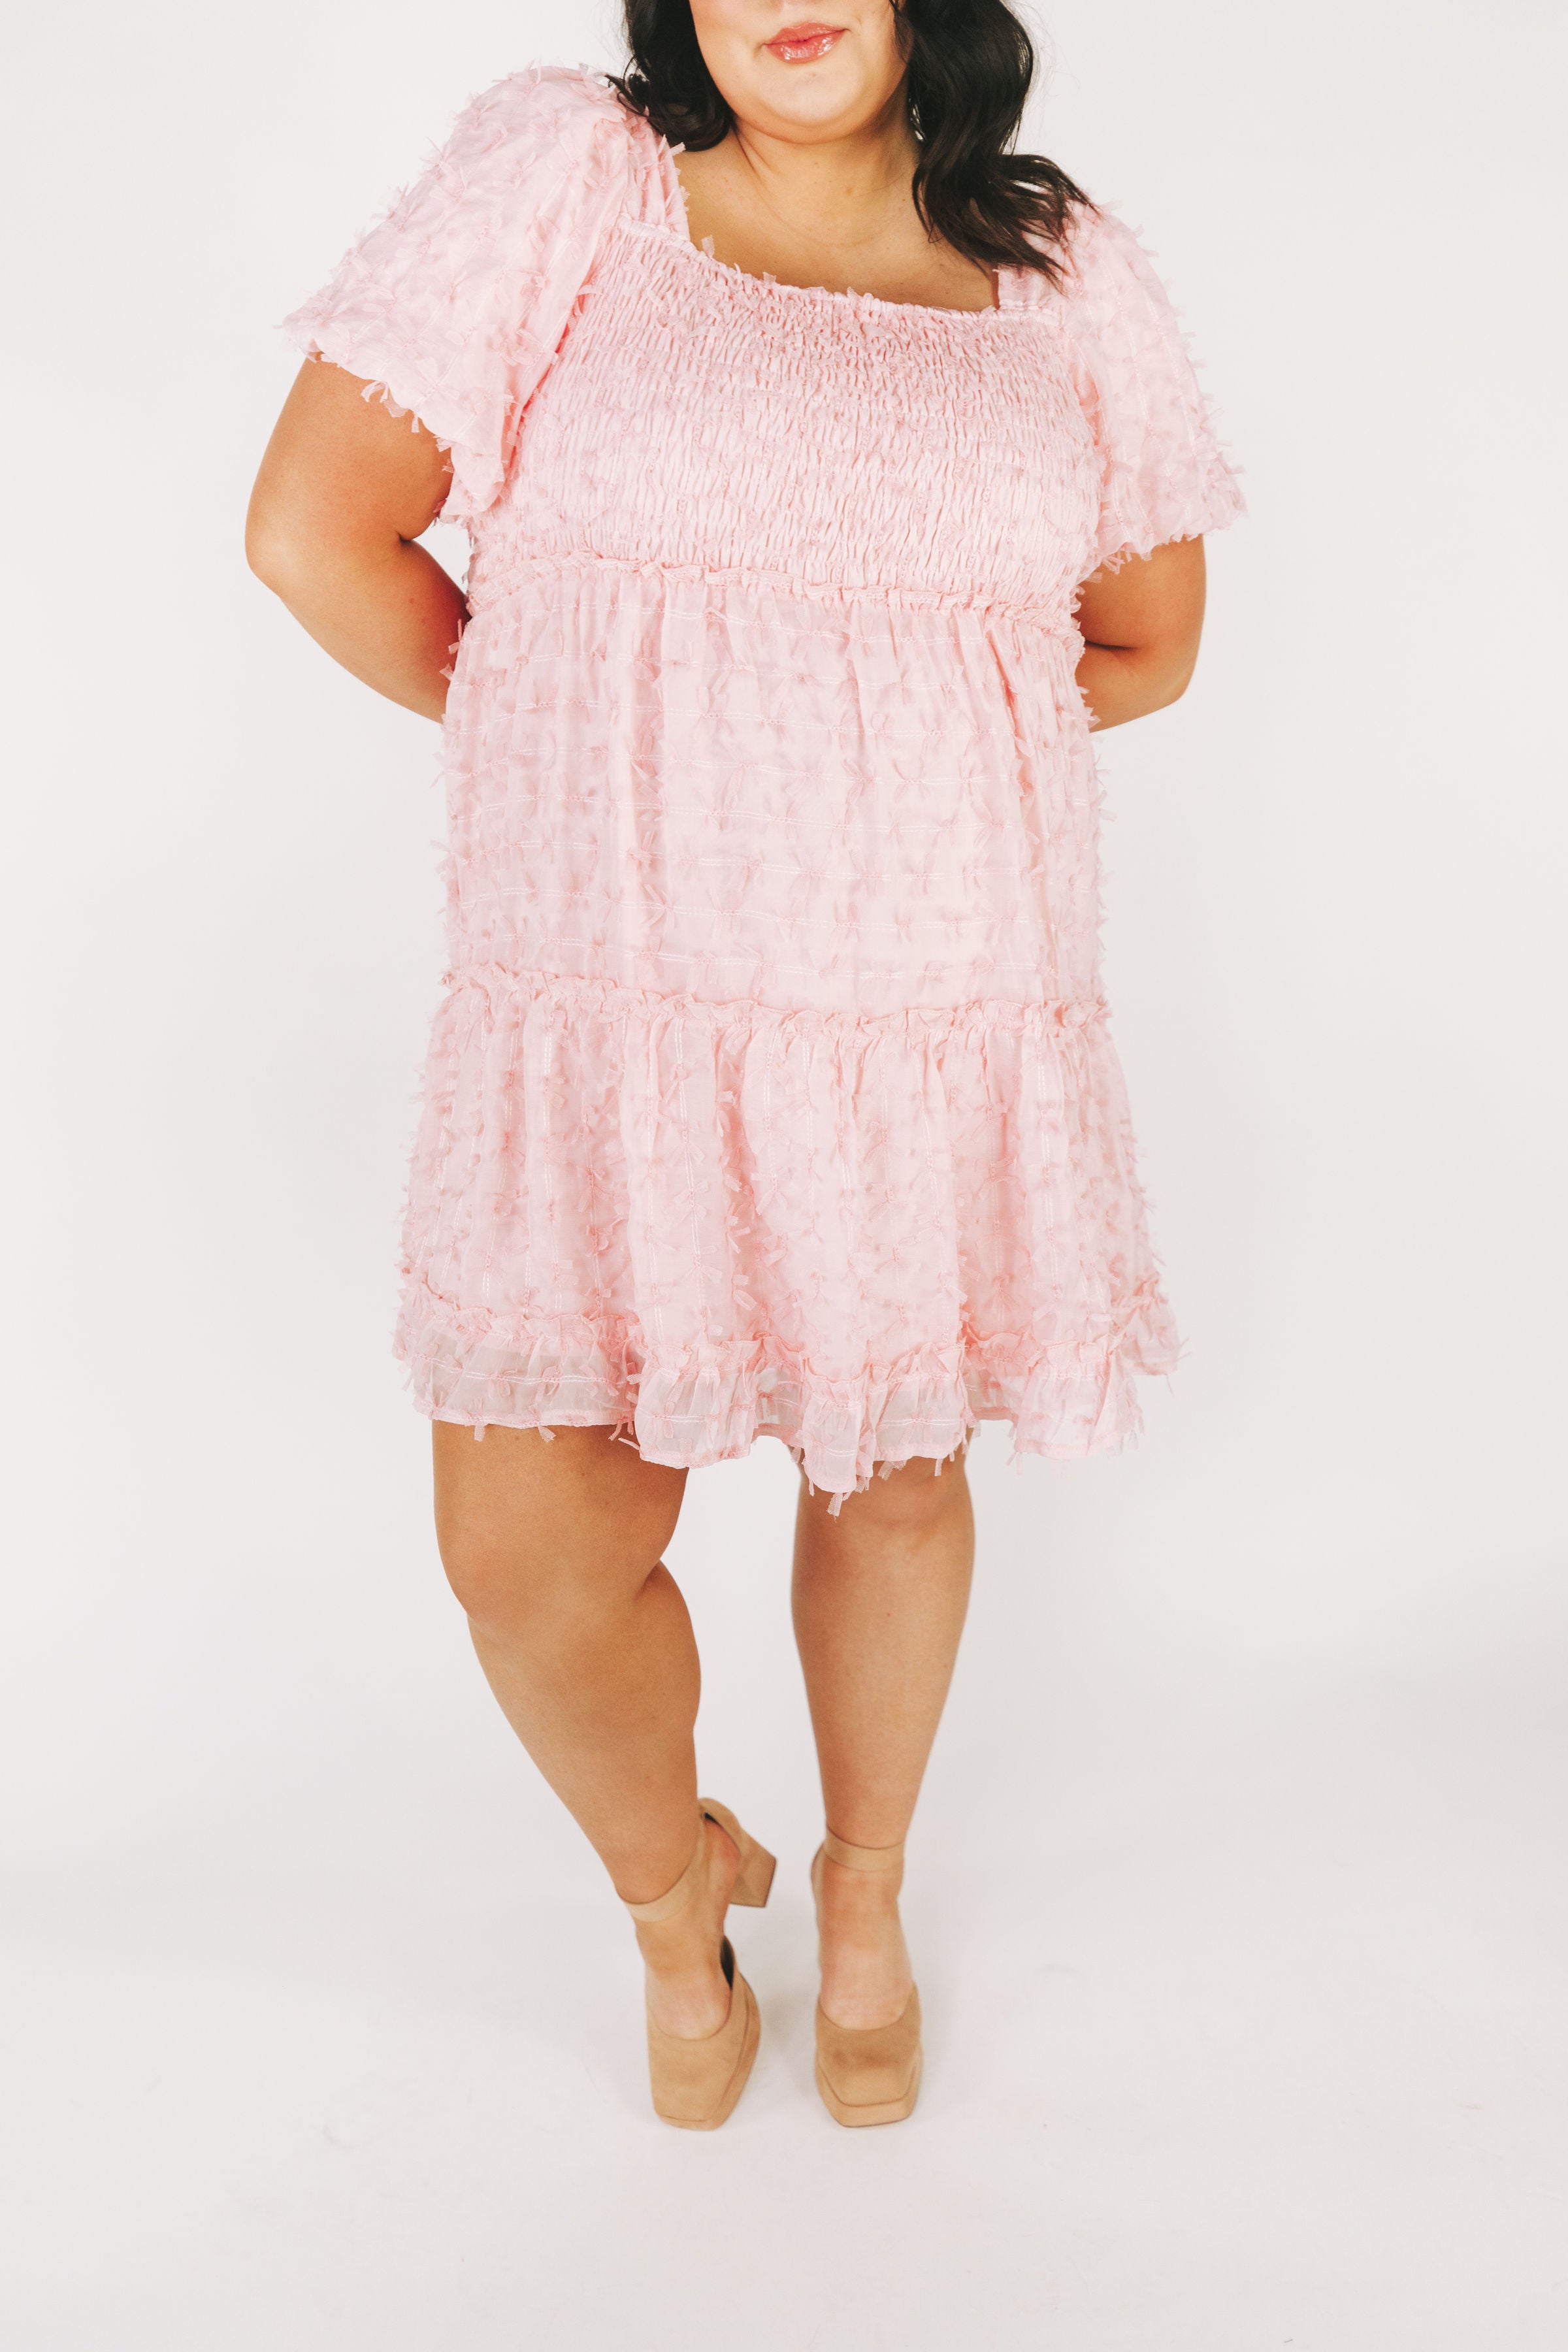 PLUS SIZE - Next Thing You Know Dress